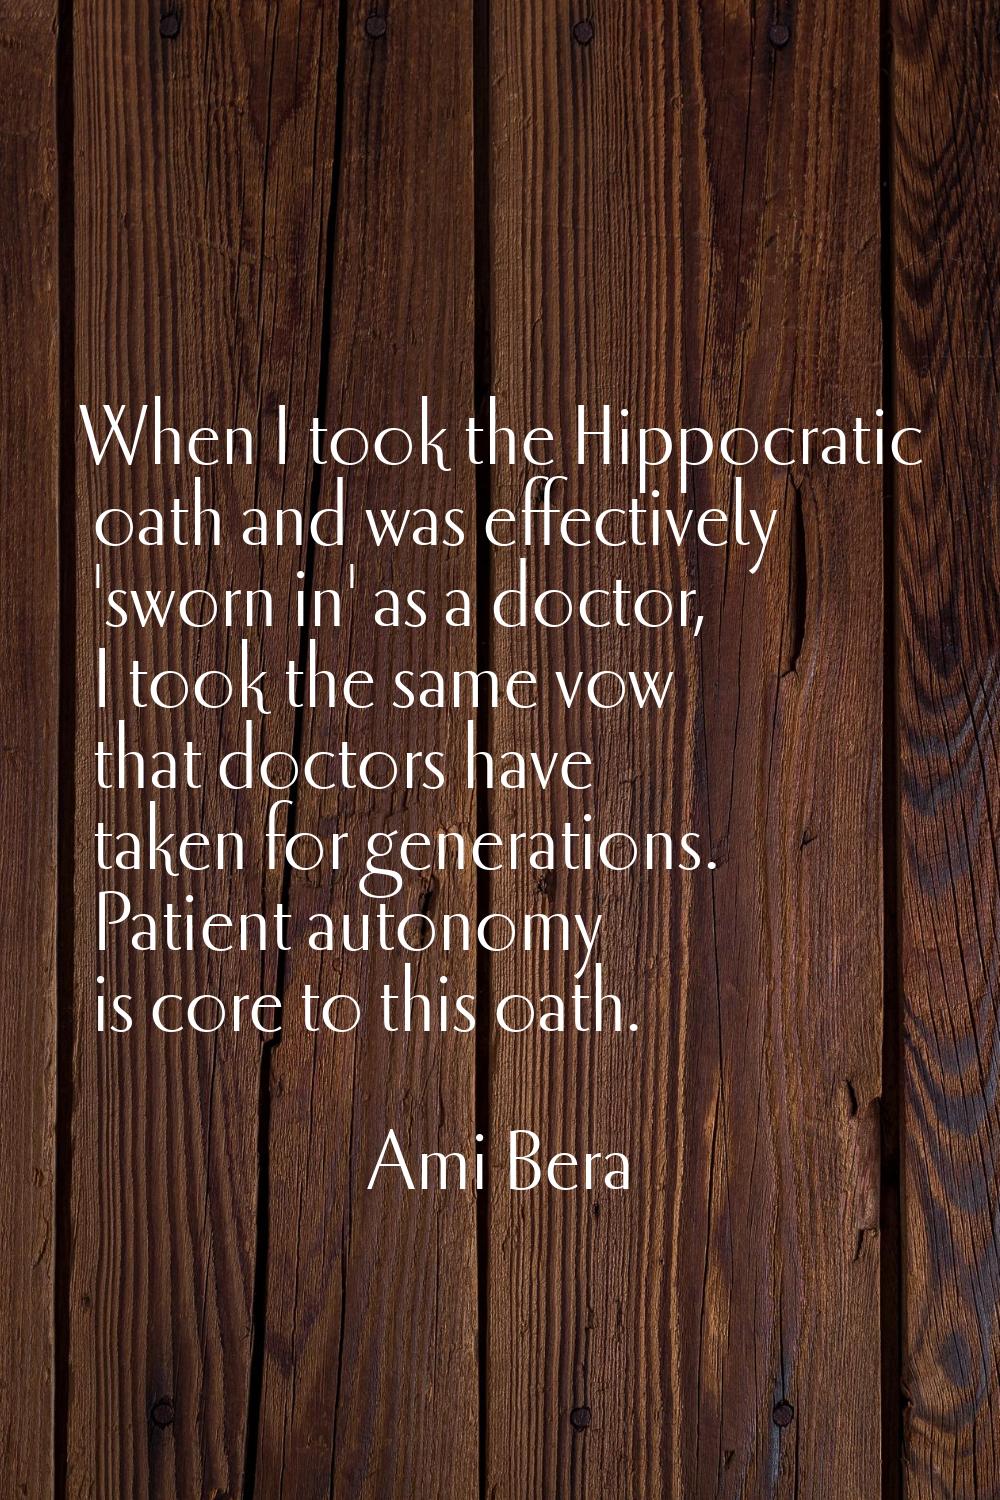 When I took the Hippocratic oath and was effectively 'sworn in' as a doctor, I took the same vow th